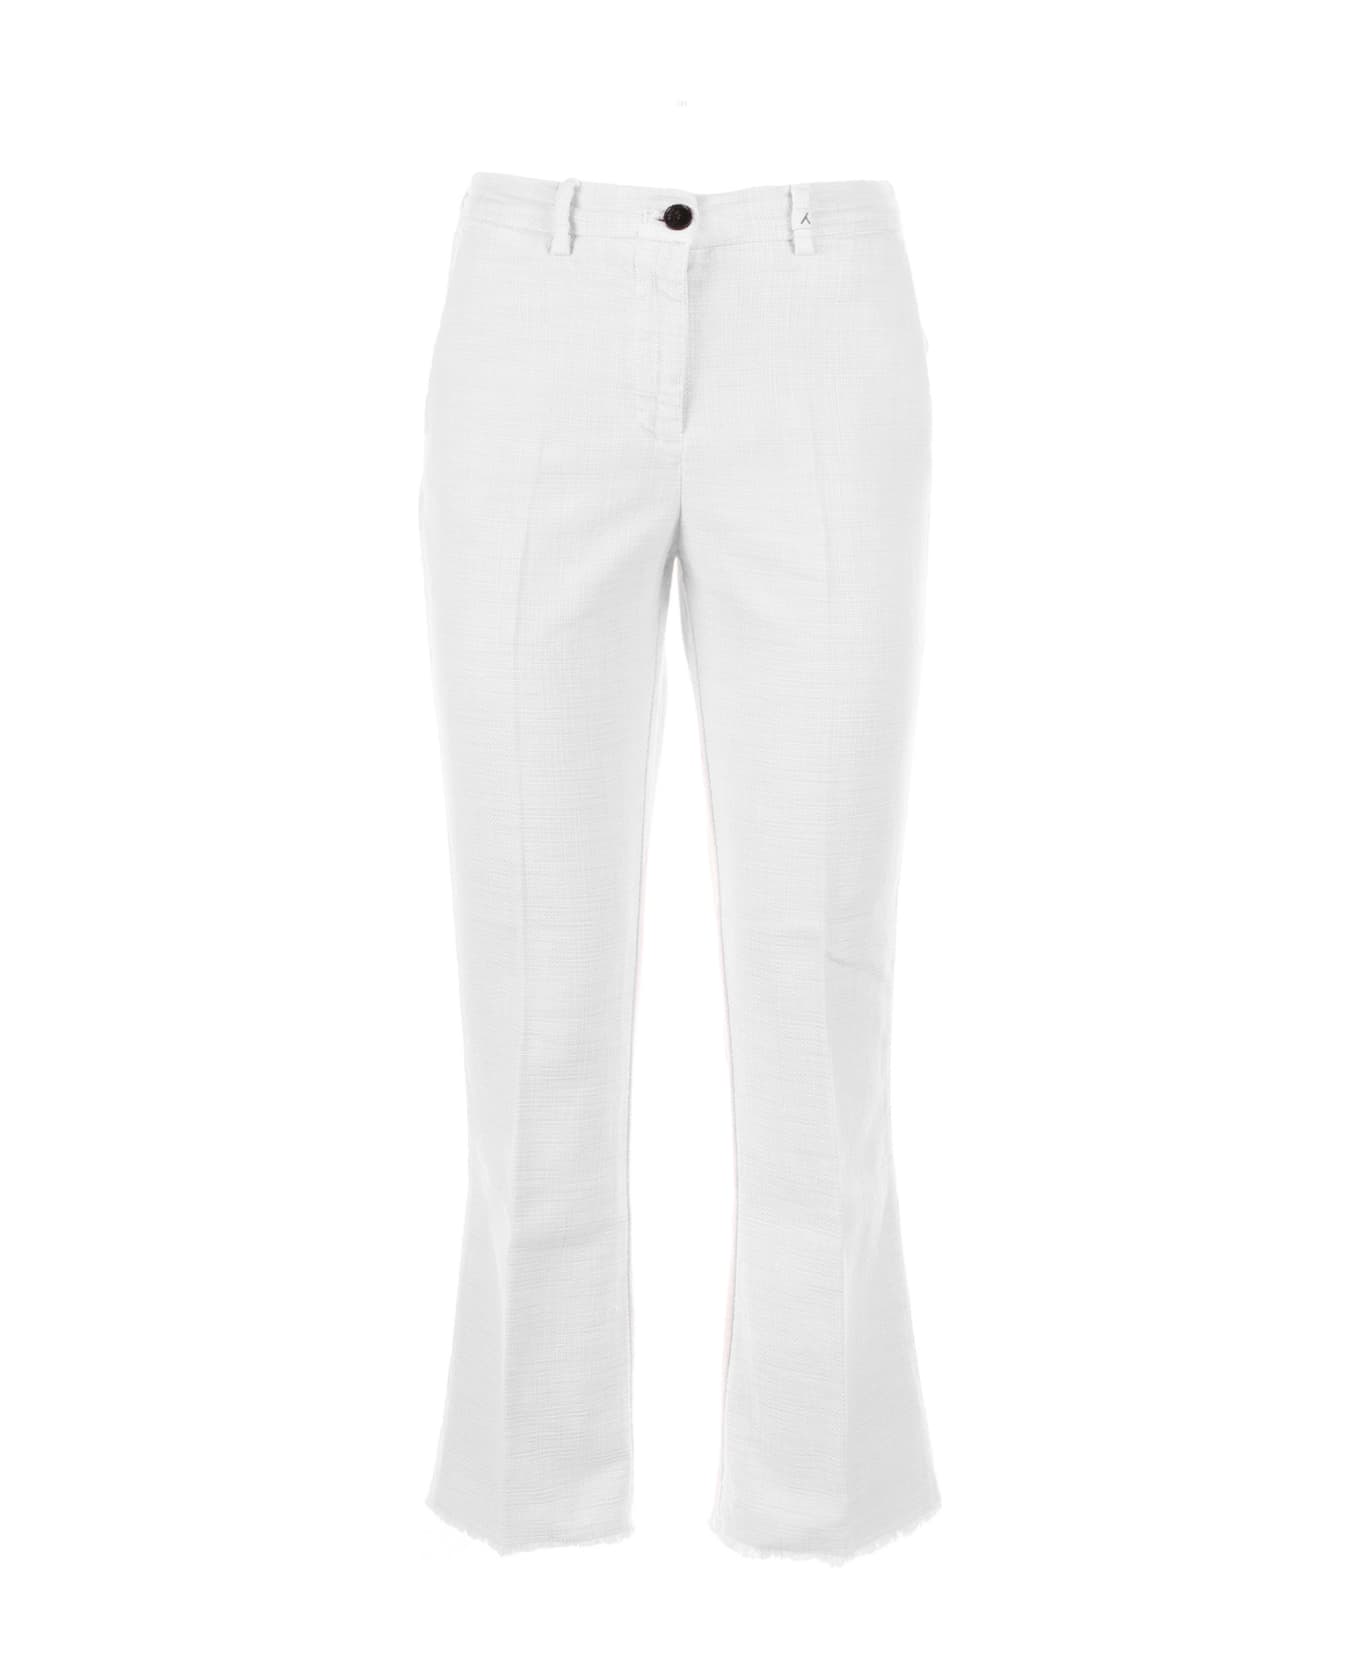 Myths Women's White Trousers - OFF WHITE ボトムス